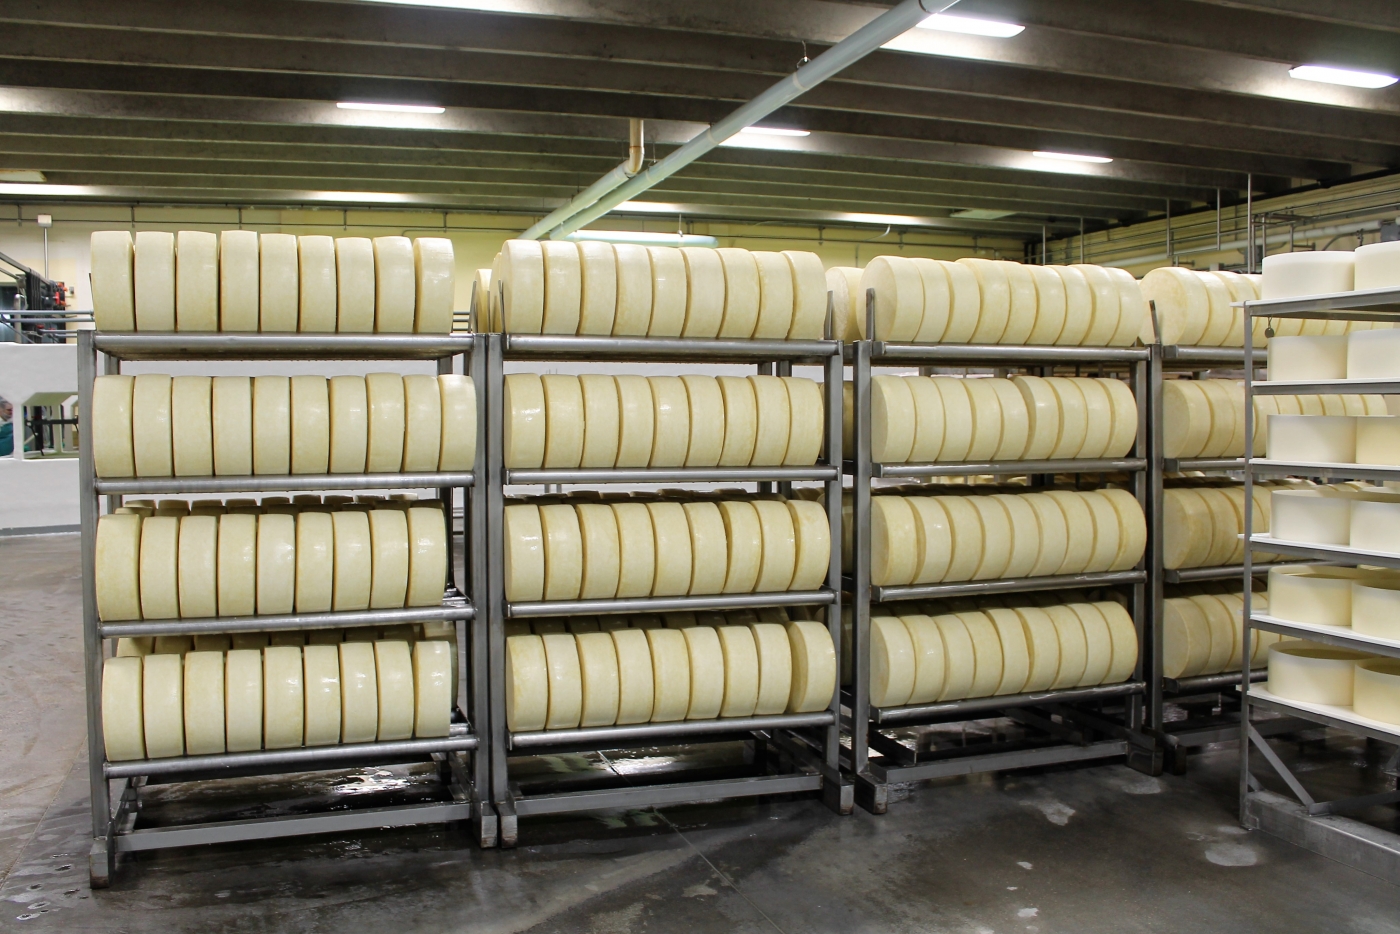 Cheese waiting to be aged.